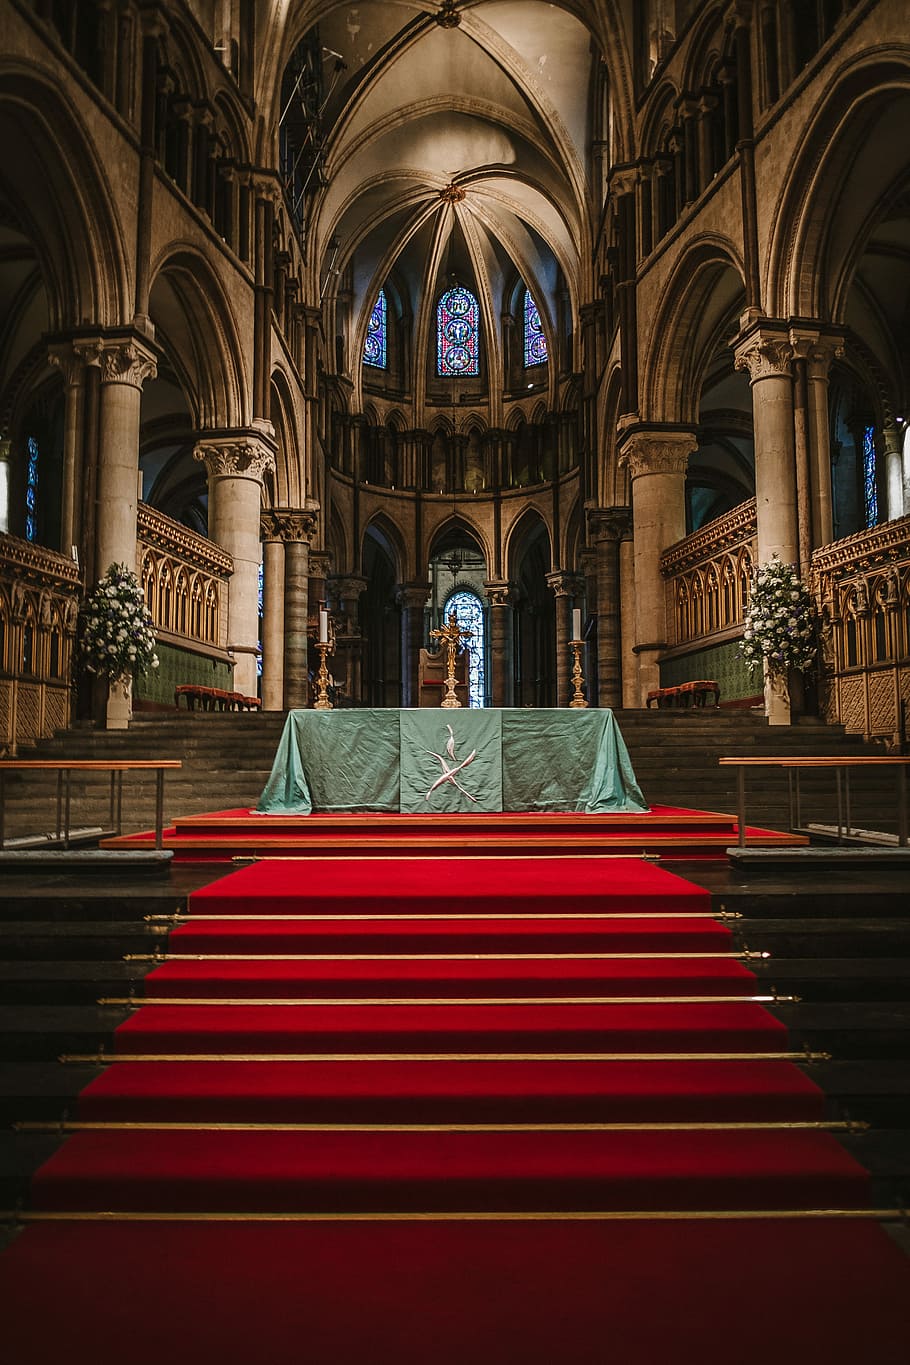 photo of interior of cathedral, red carpet on brown stair, church